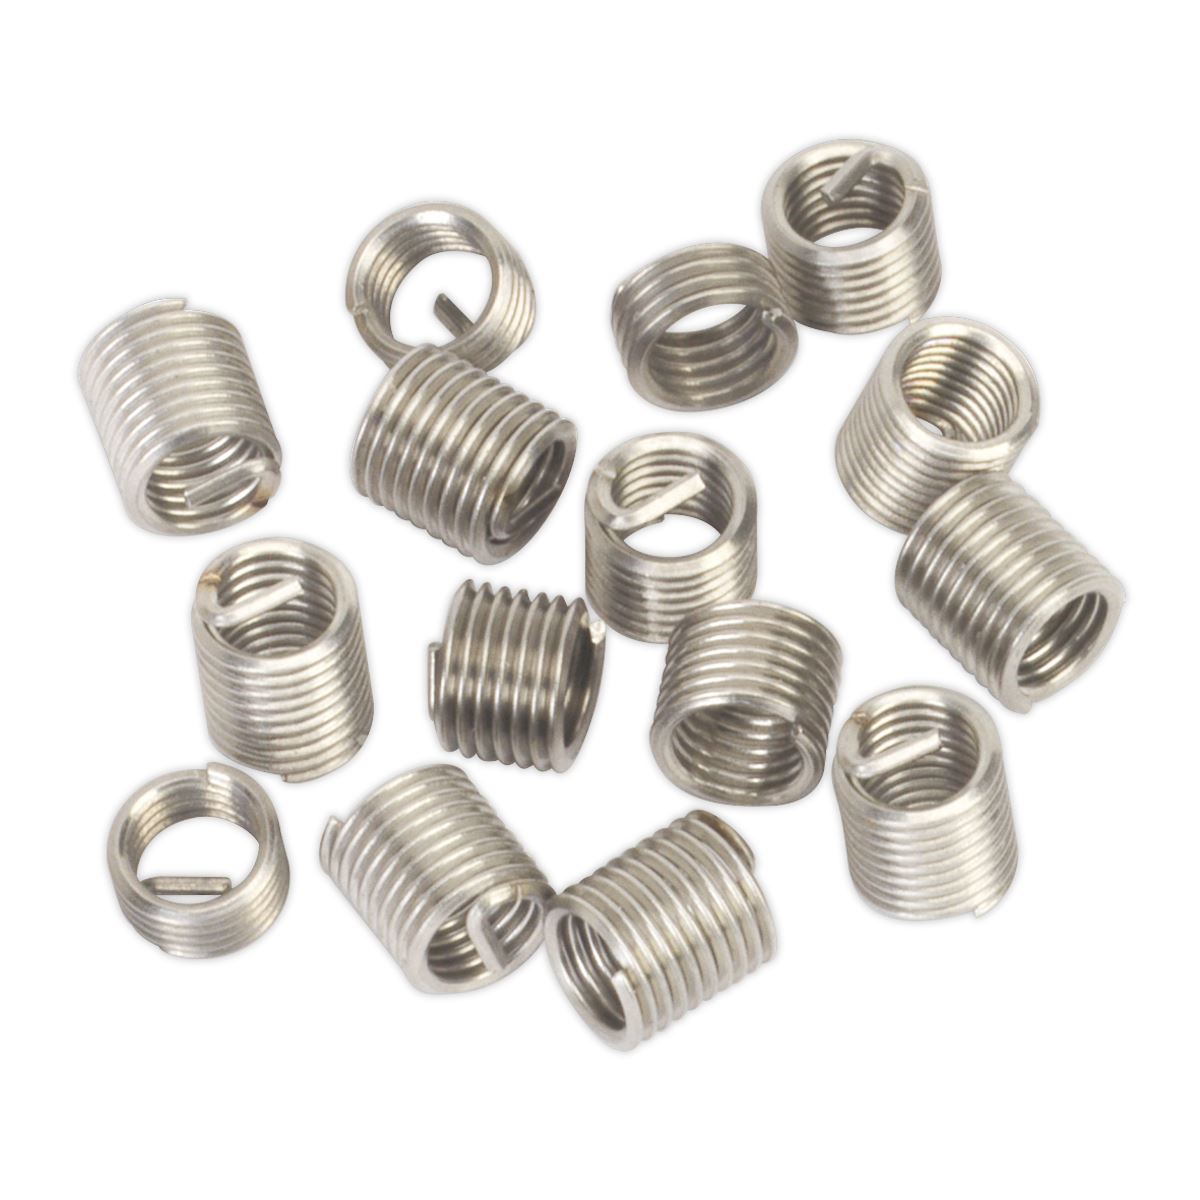 Sealey Thread Insert M5 x 0.8mm for TRM5 Threaded Inserts Helicoil 15 Pack